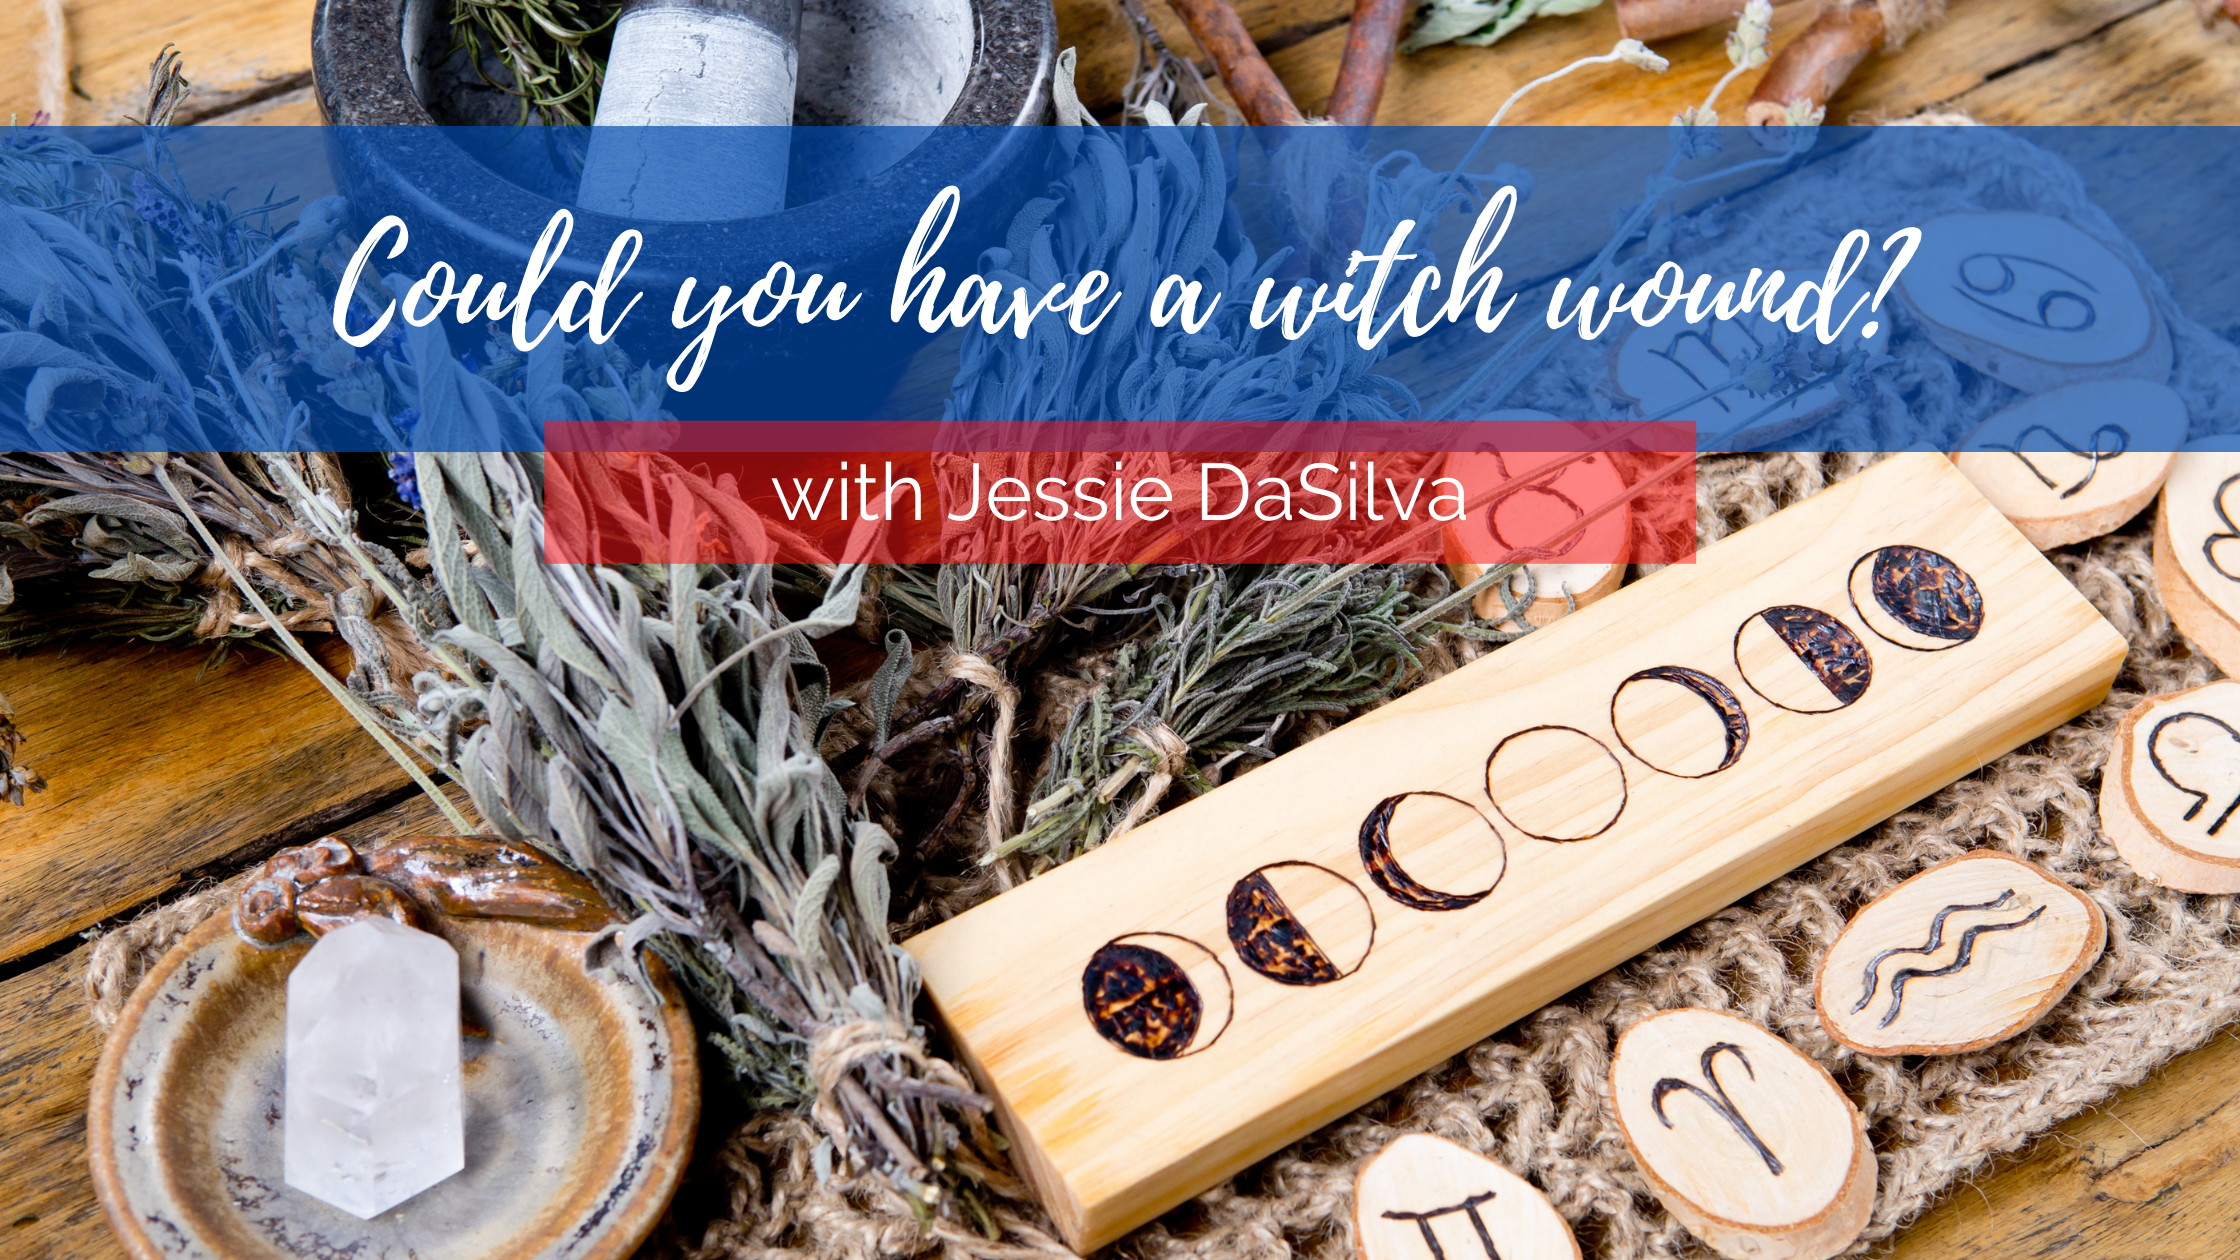 Picture of a witch's altar with "Could you have a witch wound? with Jessie DaSilva" written over the top